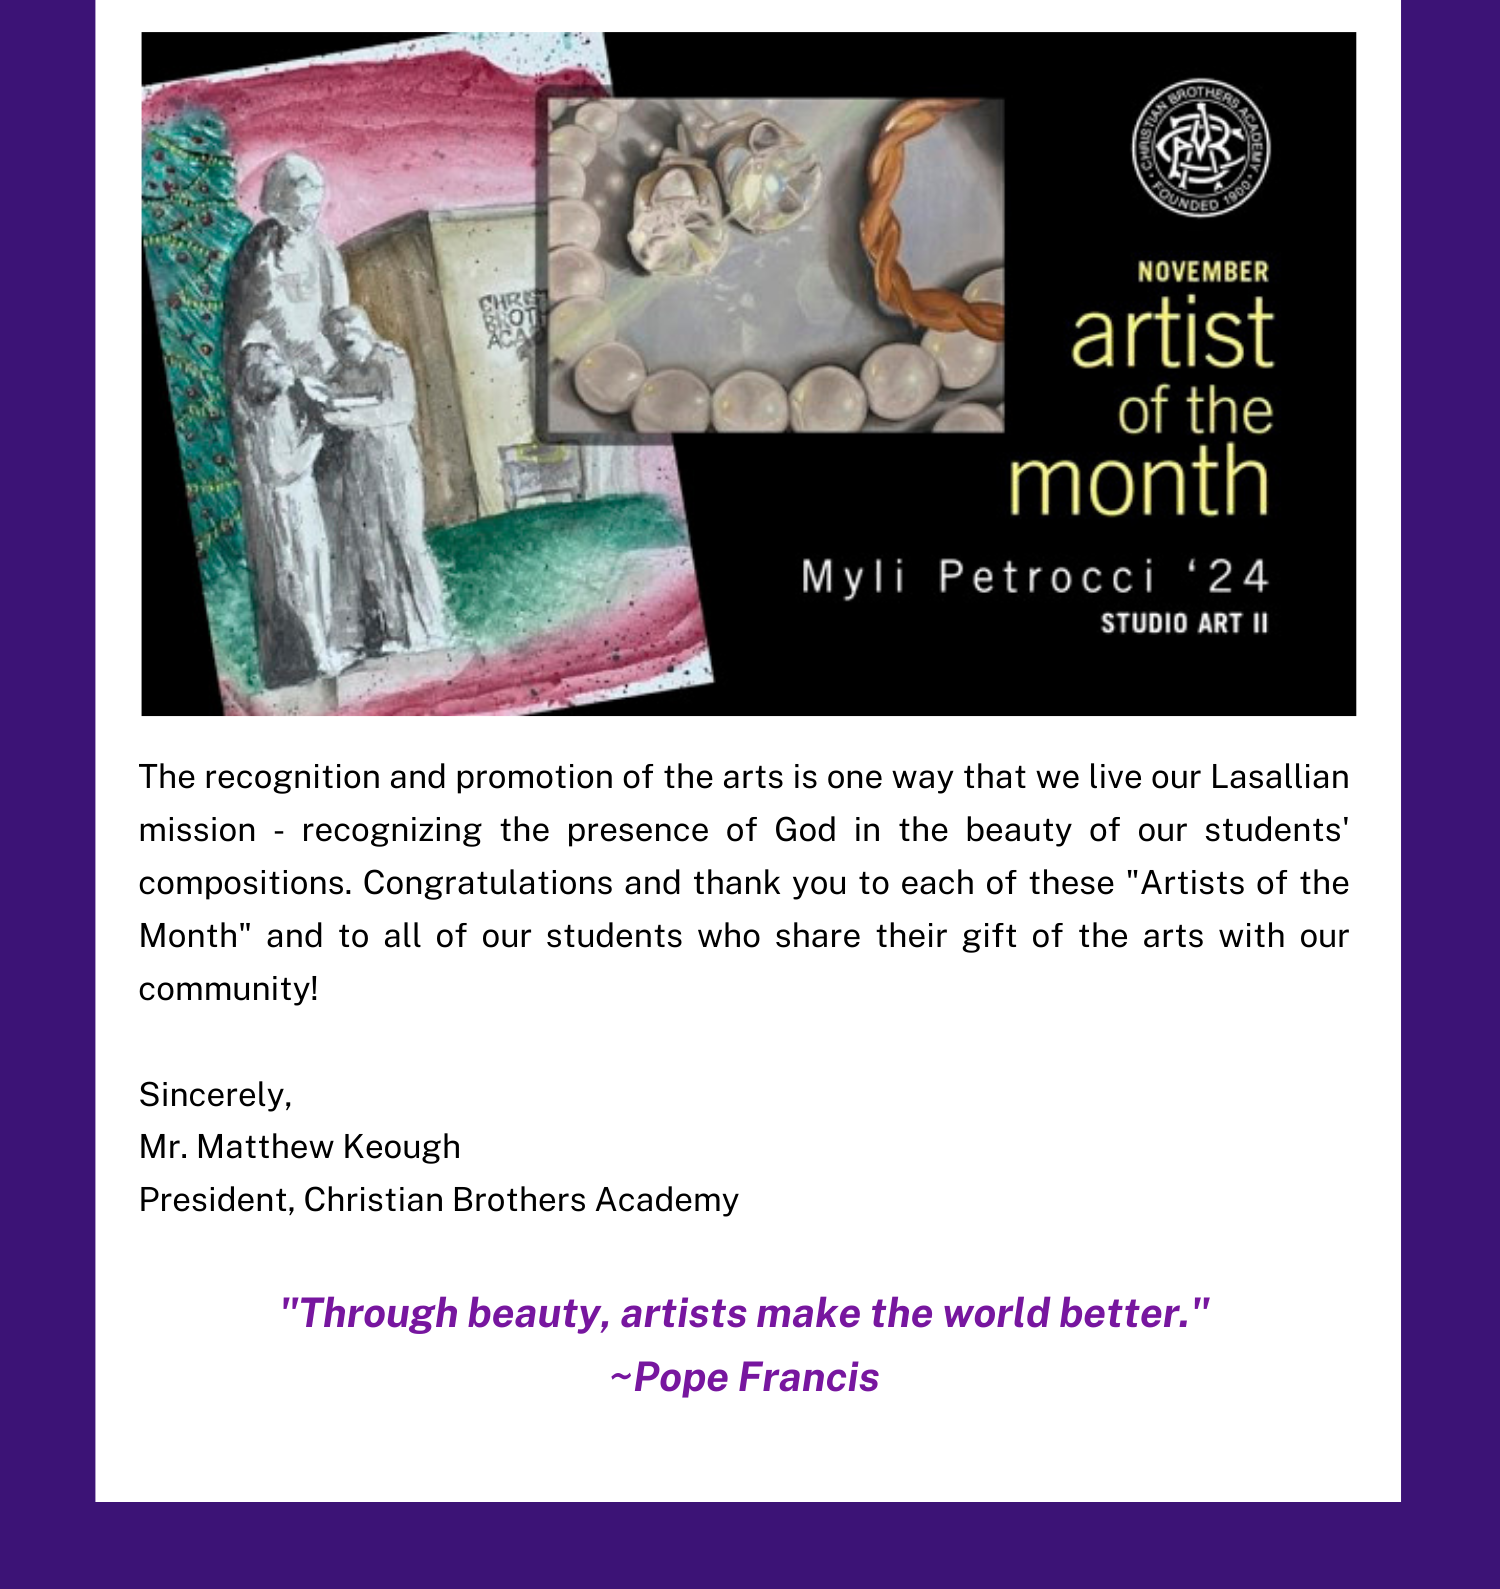 Christian Brothers Academy Myli Petrocci November Artist of the Month